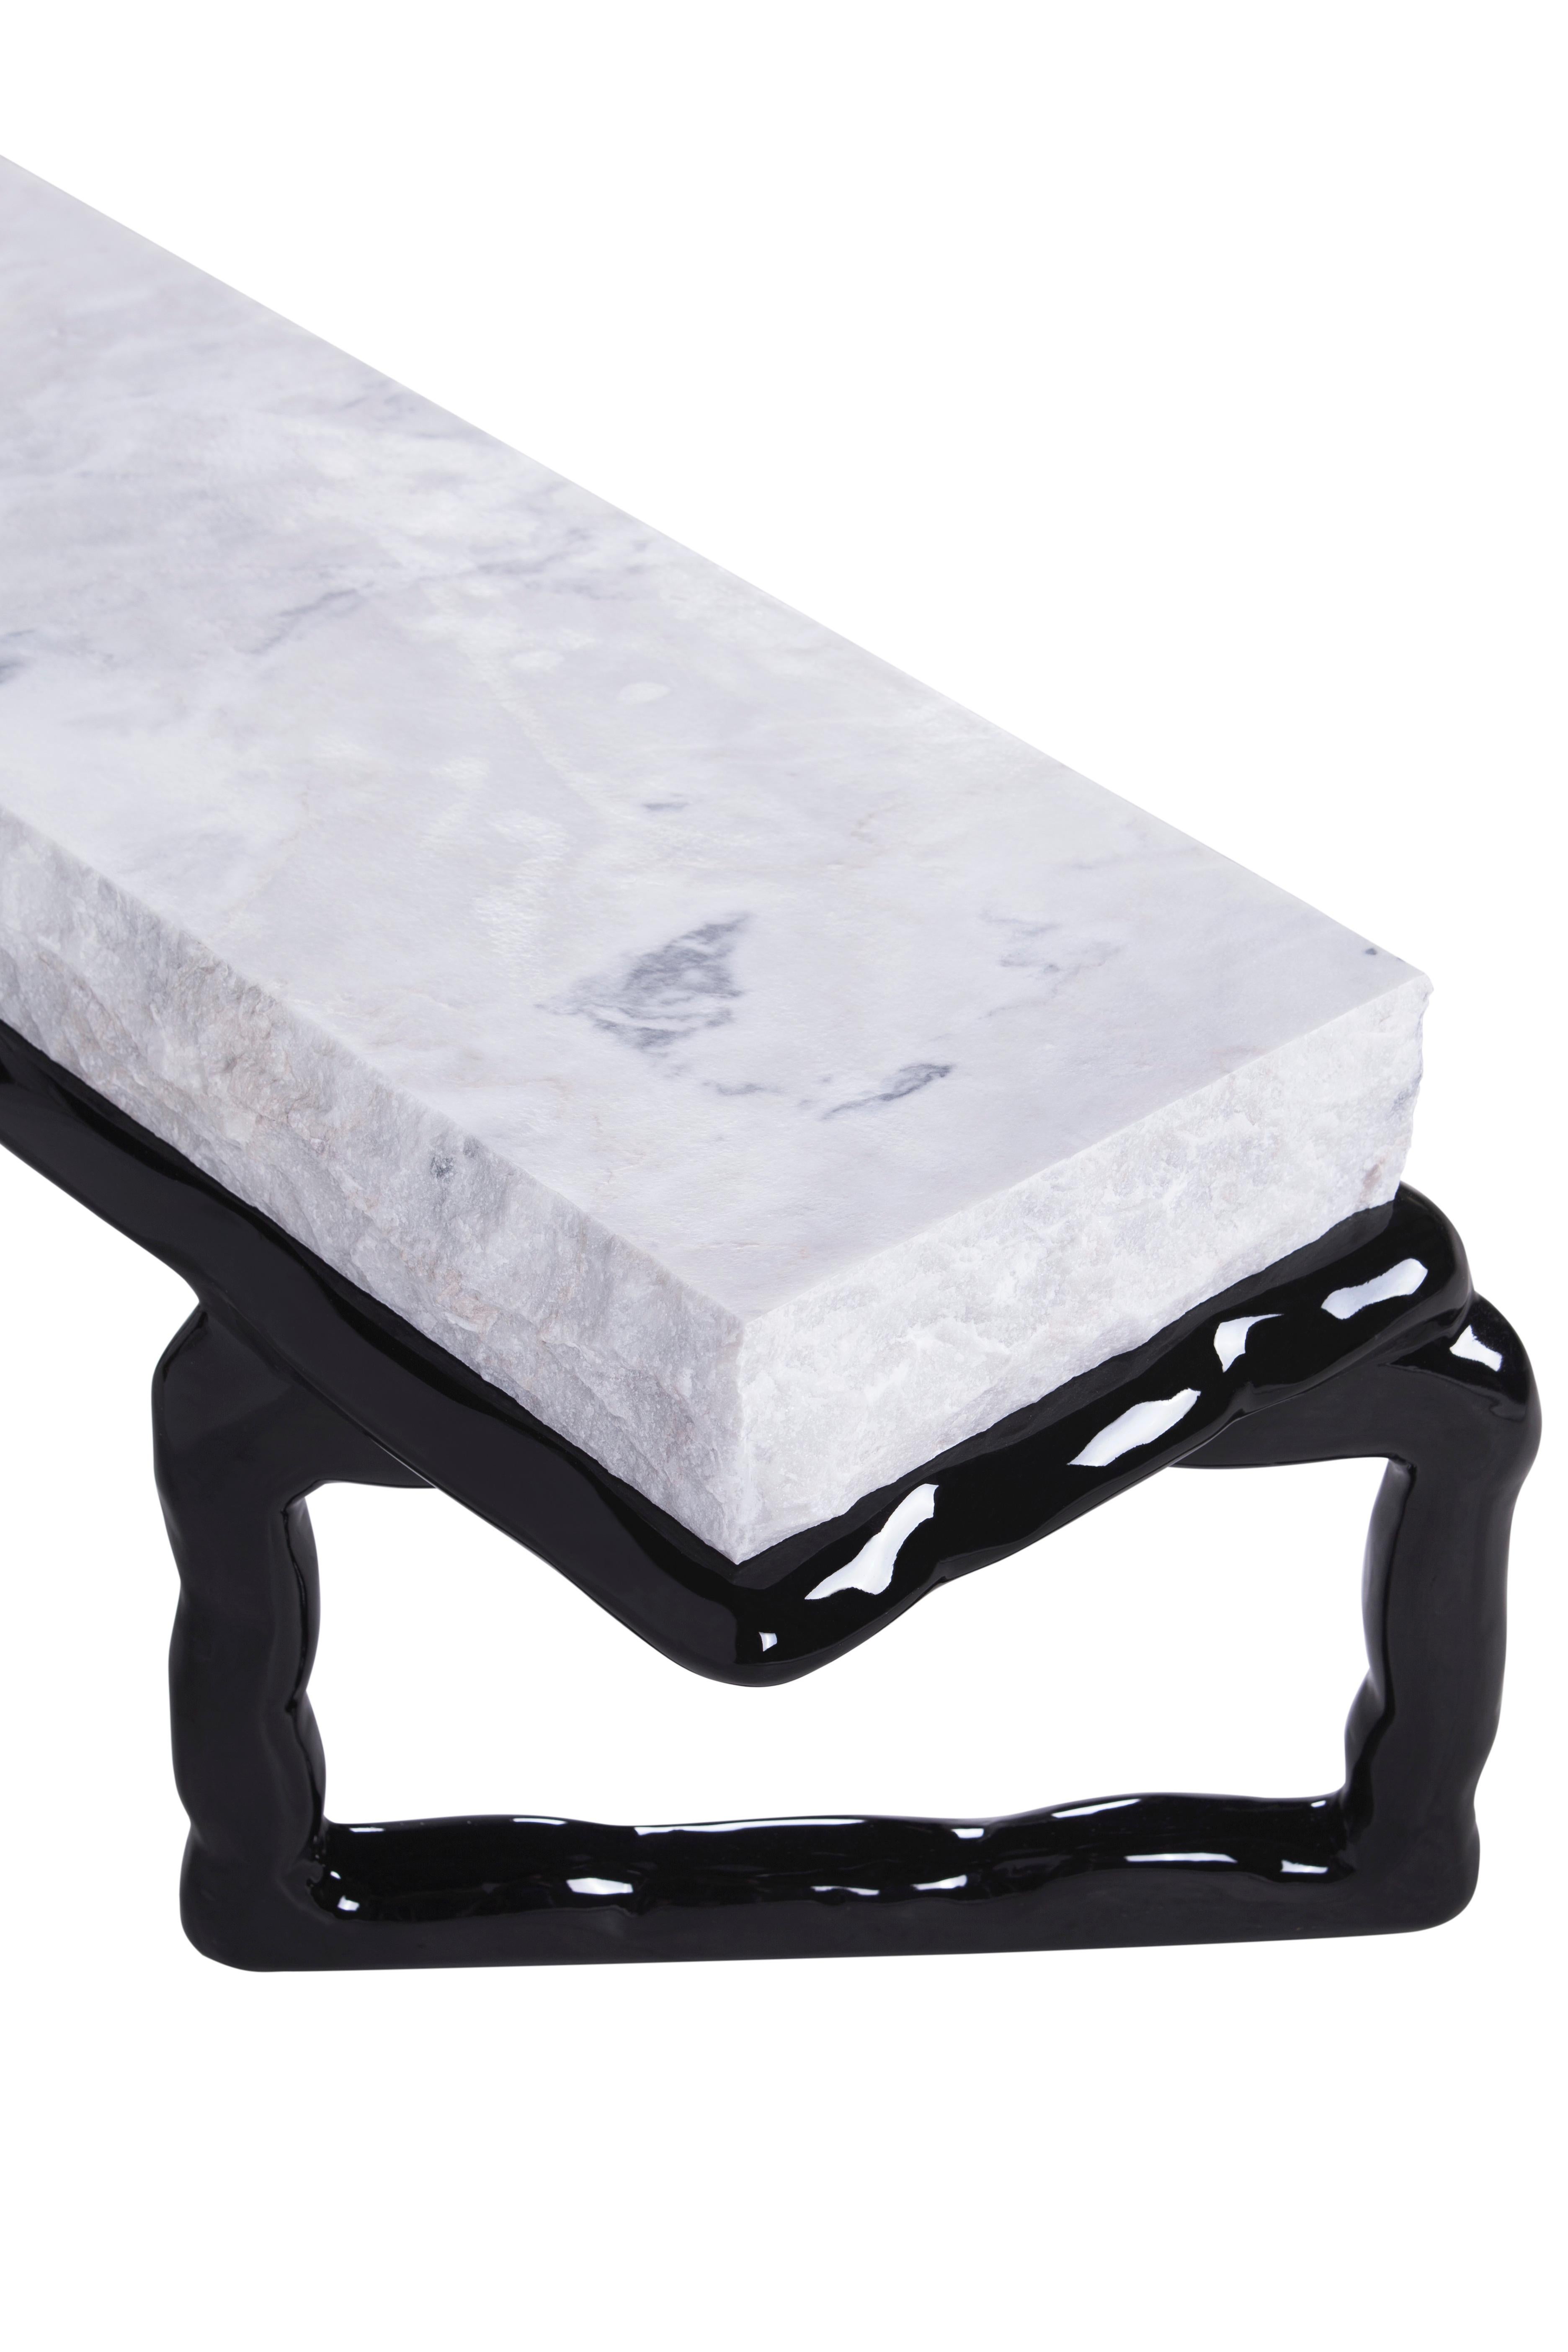 Hand-Crafted Art Deco Stone Coffee Table Calacatta Marble Handmade in Portugal by Greenapple For Sale